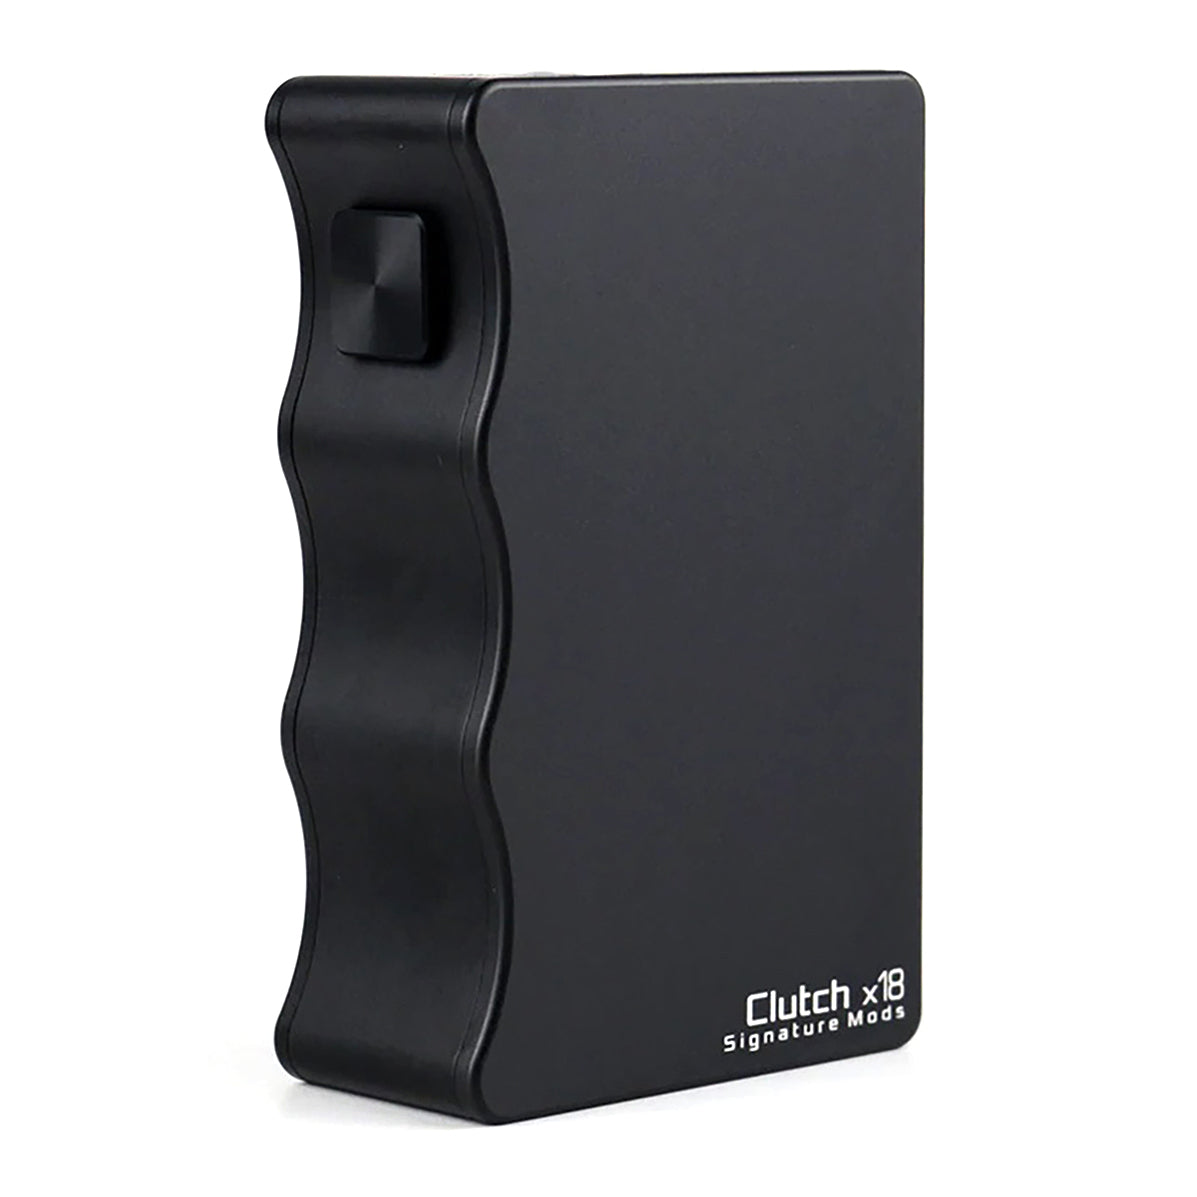 Clutch Dual 18650 Black Mod by Dovpo, Signature Mods & Mike Vapes